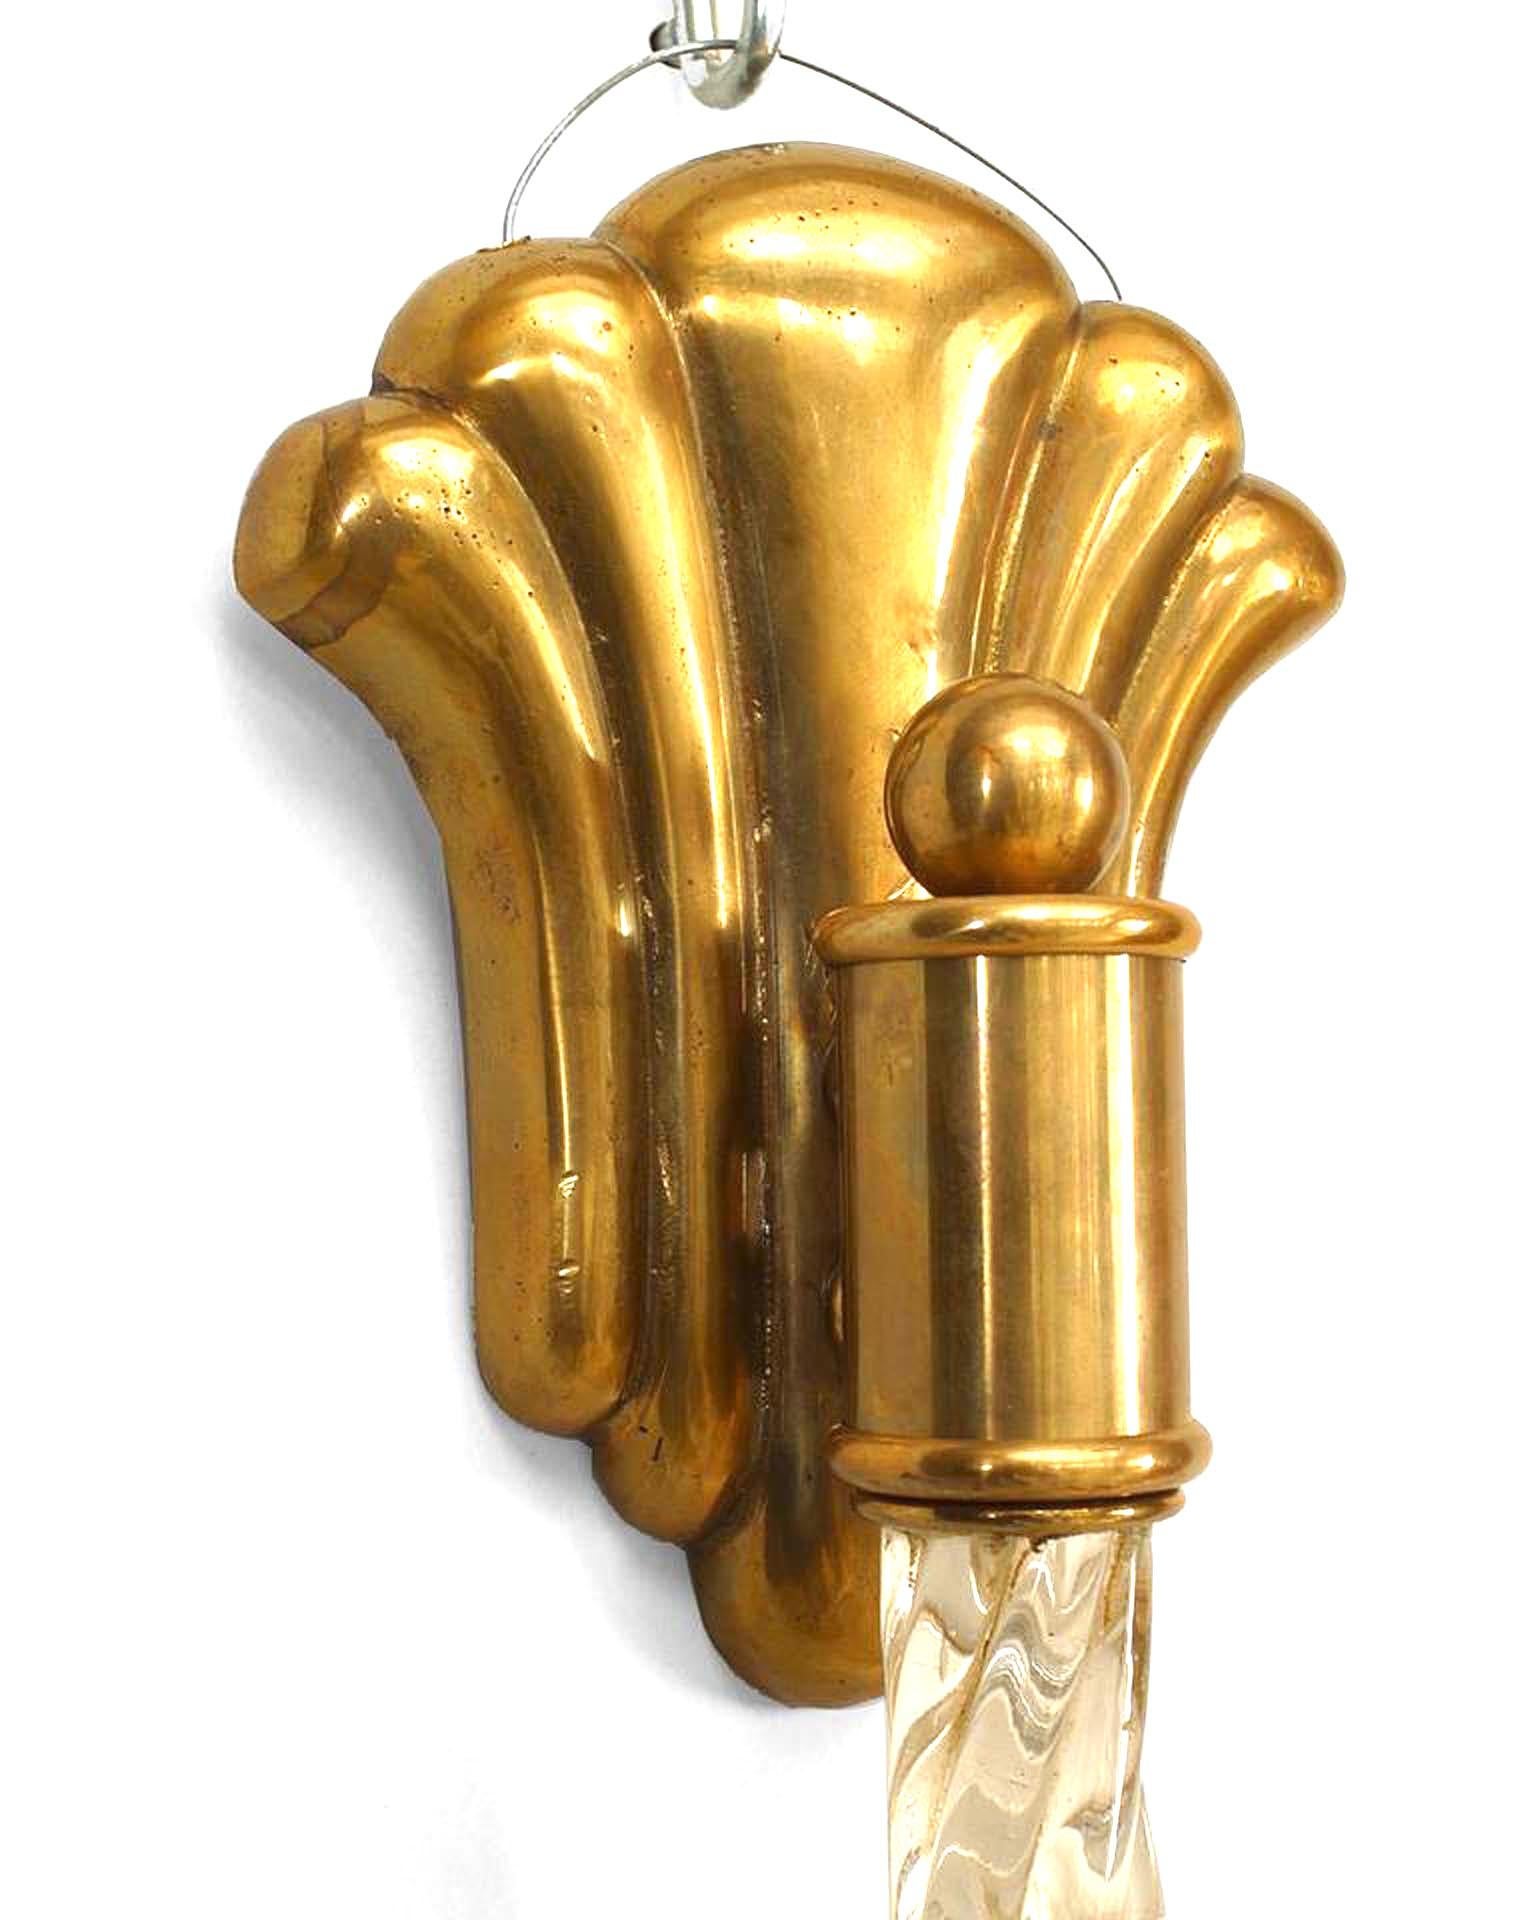 Italian Pair of 1930's Murano Glass Tulip Wall Sconces, by Barovier e Toso